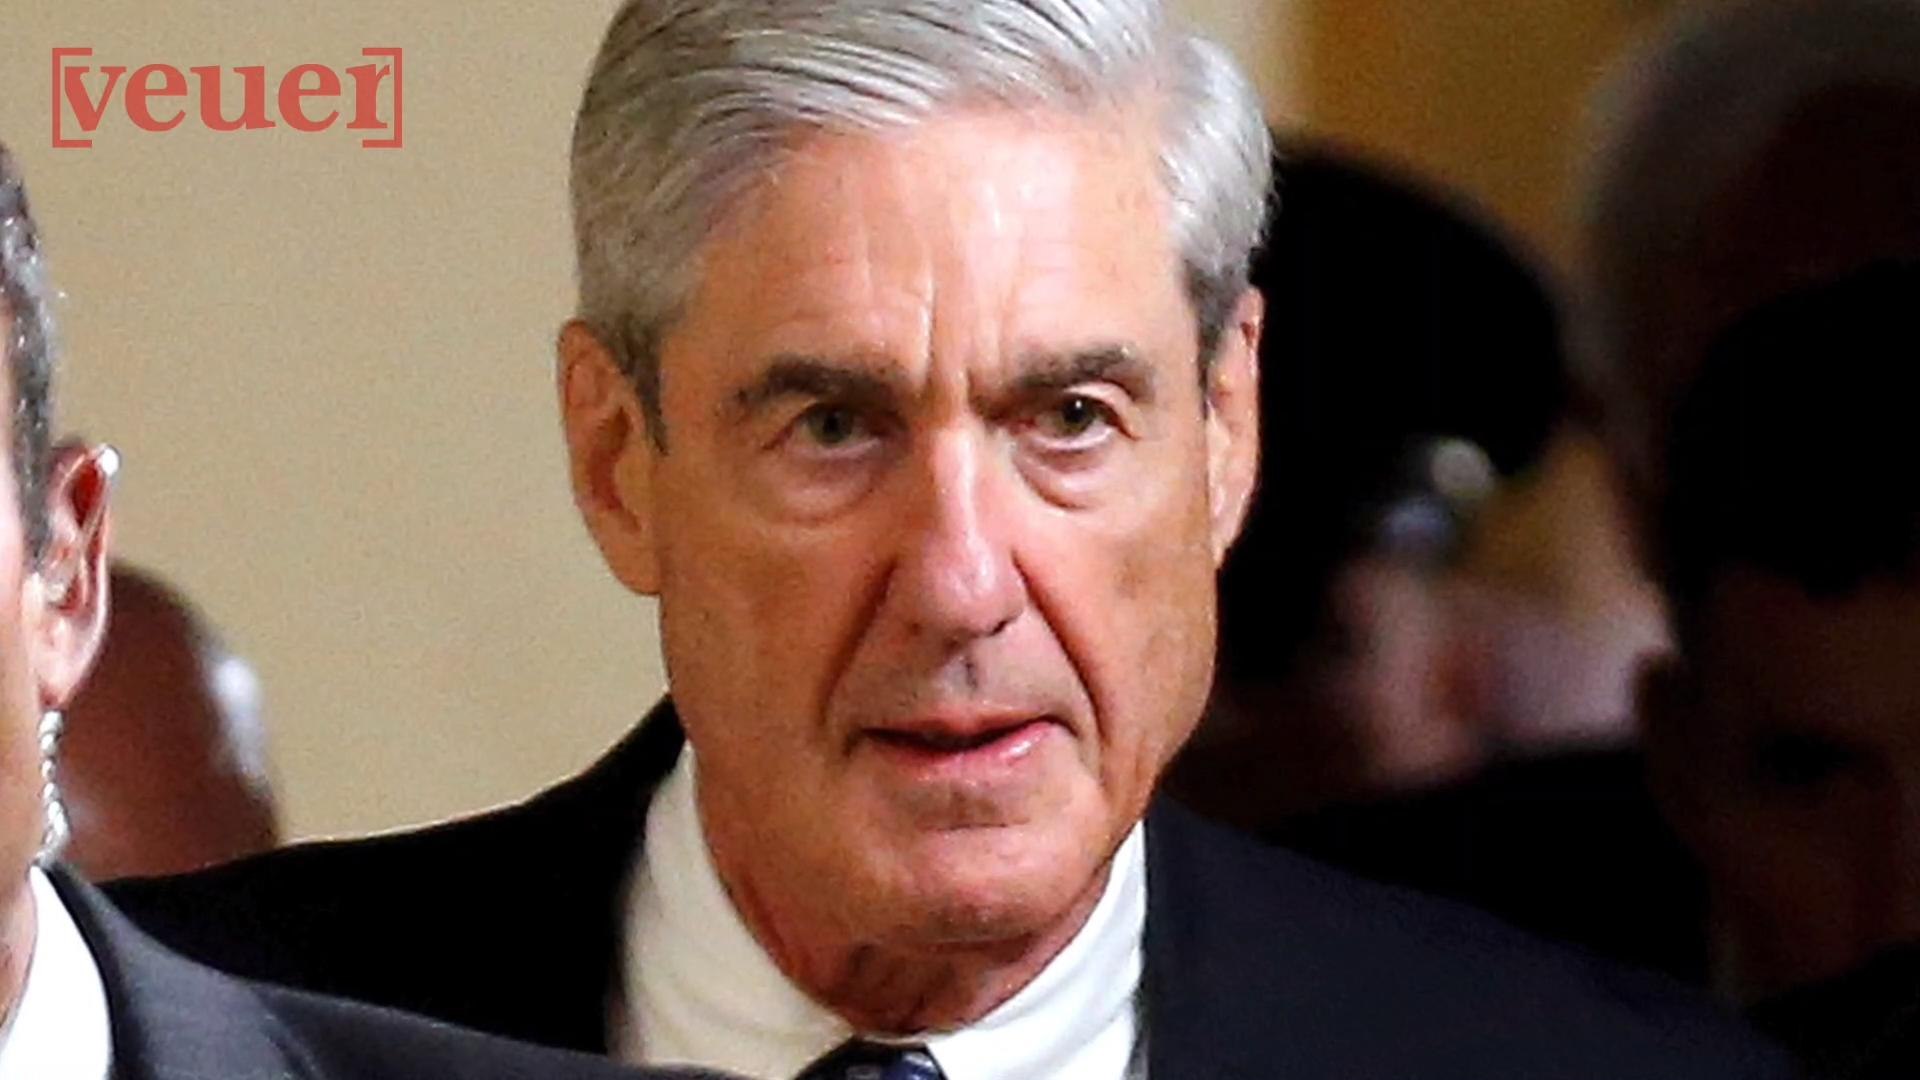 Special Counsel Robert Mueller Indicts 13 Russian Nationals For Meddling In U.S. Elections